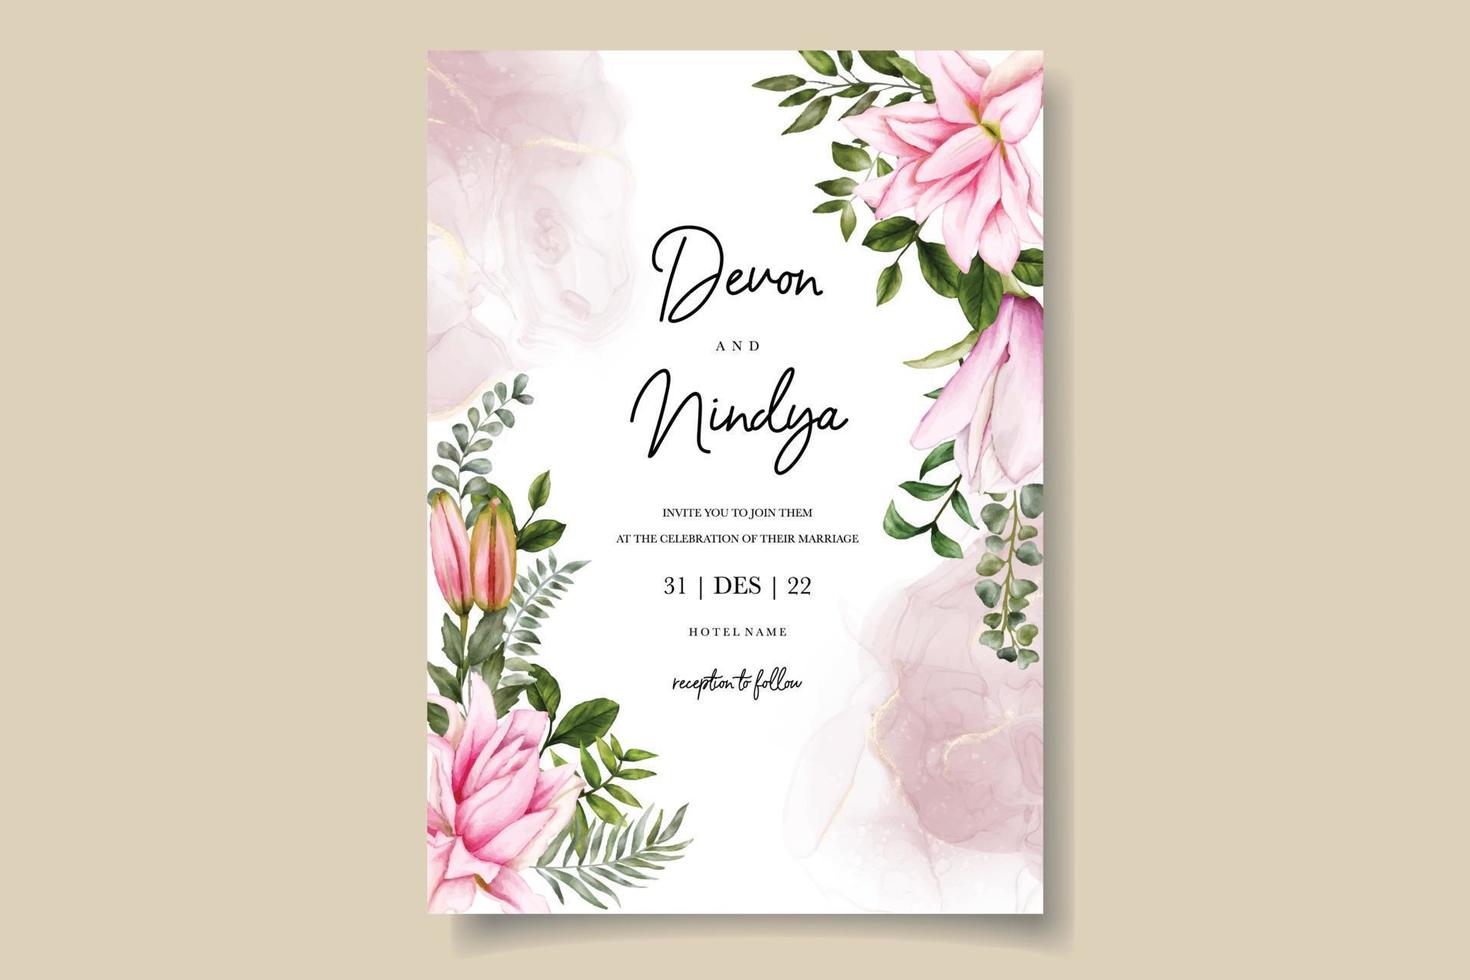 wedding card with watercolor flower vector